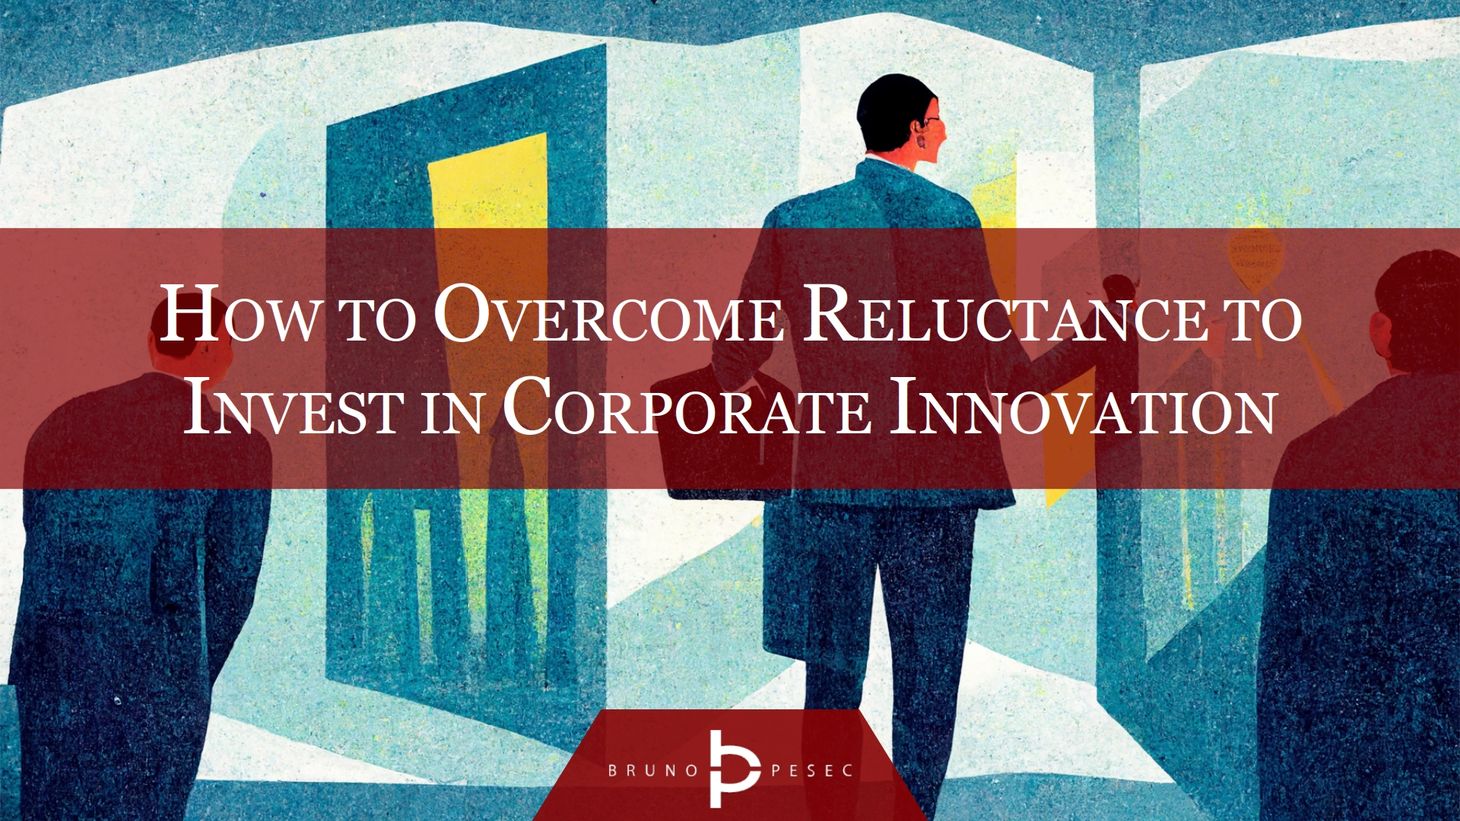 How to overcome reluctance to invest in corporate innovation